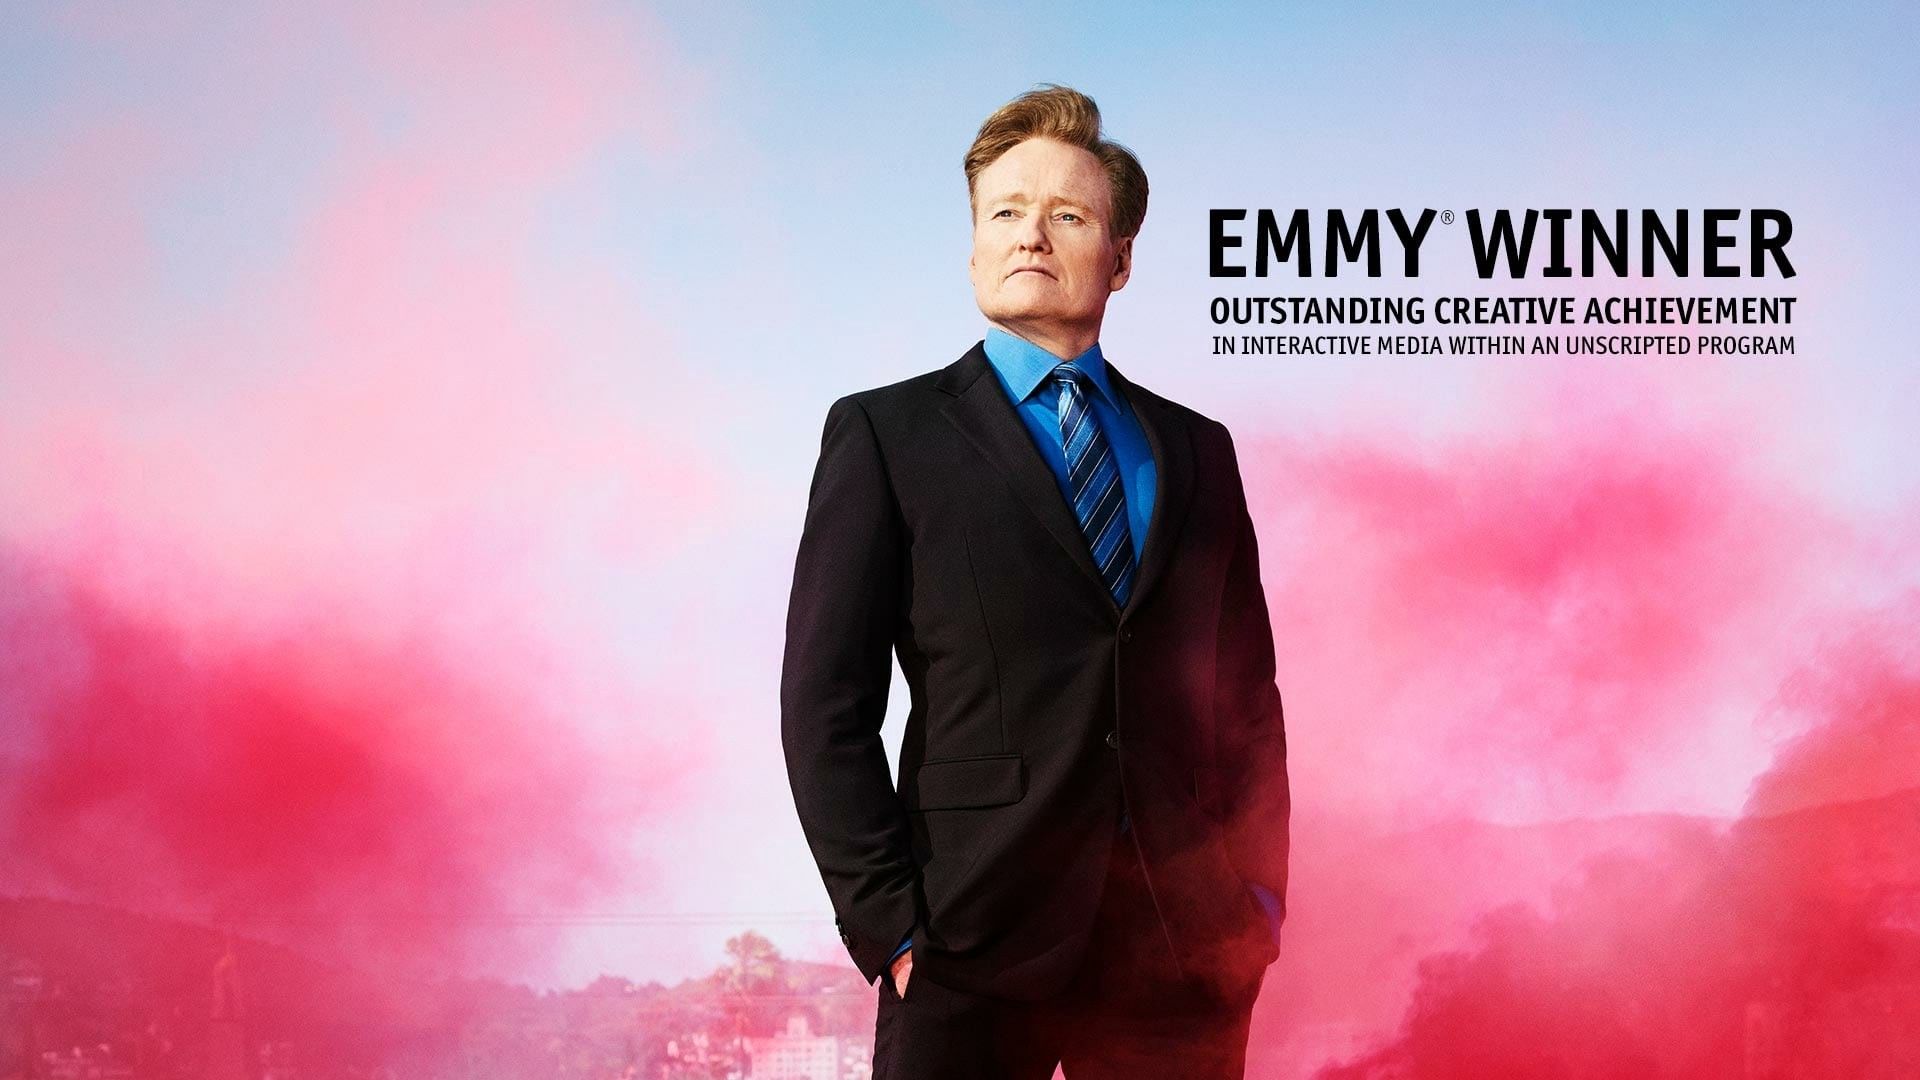 HD desktop wallpaper featuring a man standing confidently with EMMY WINNER text, against a vibrant pink smoke background.